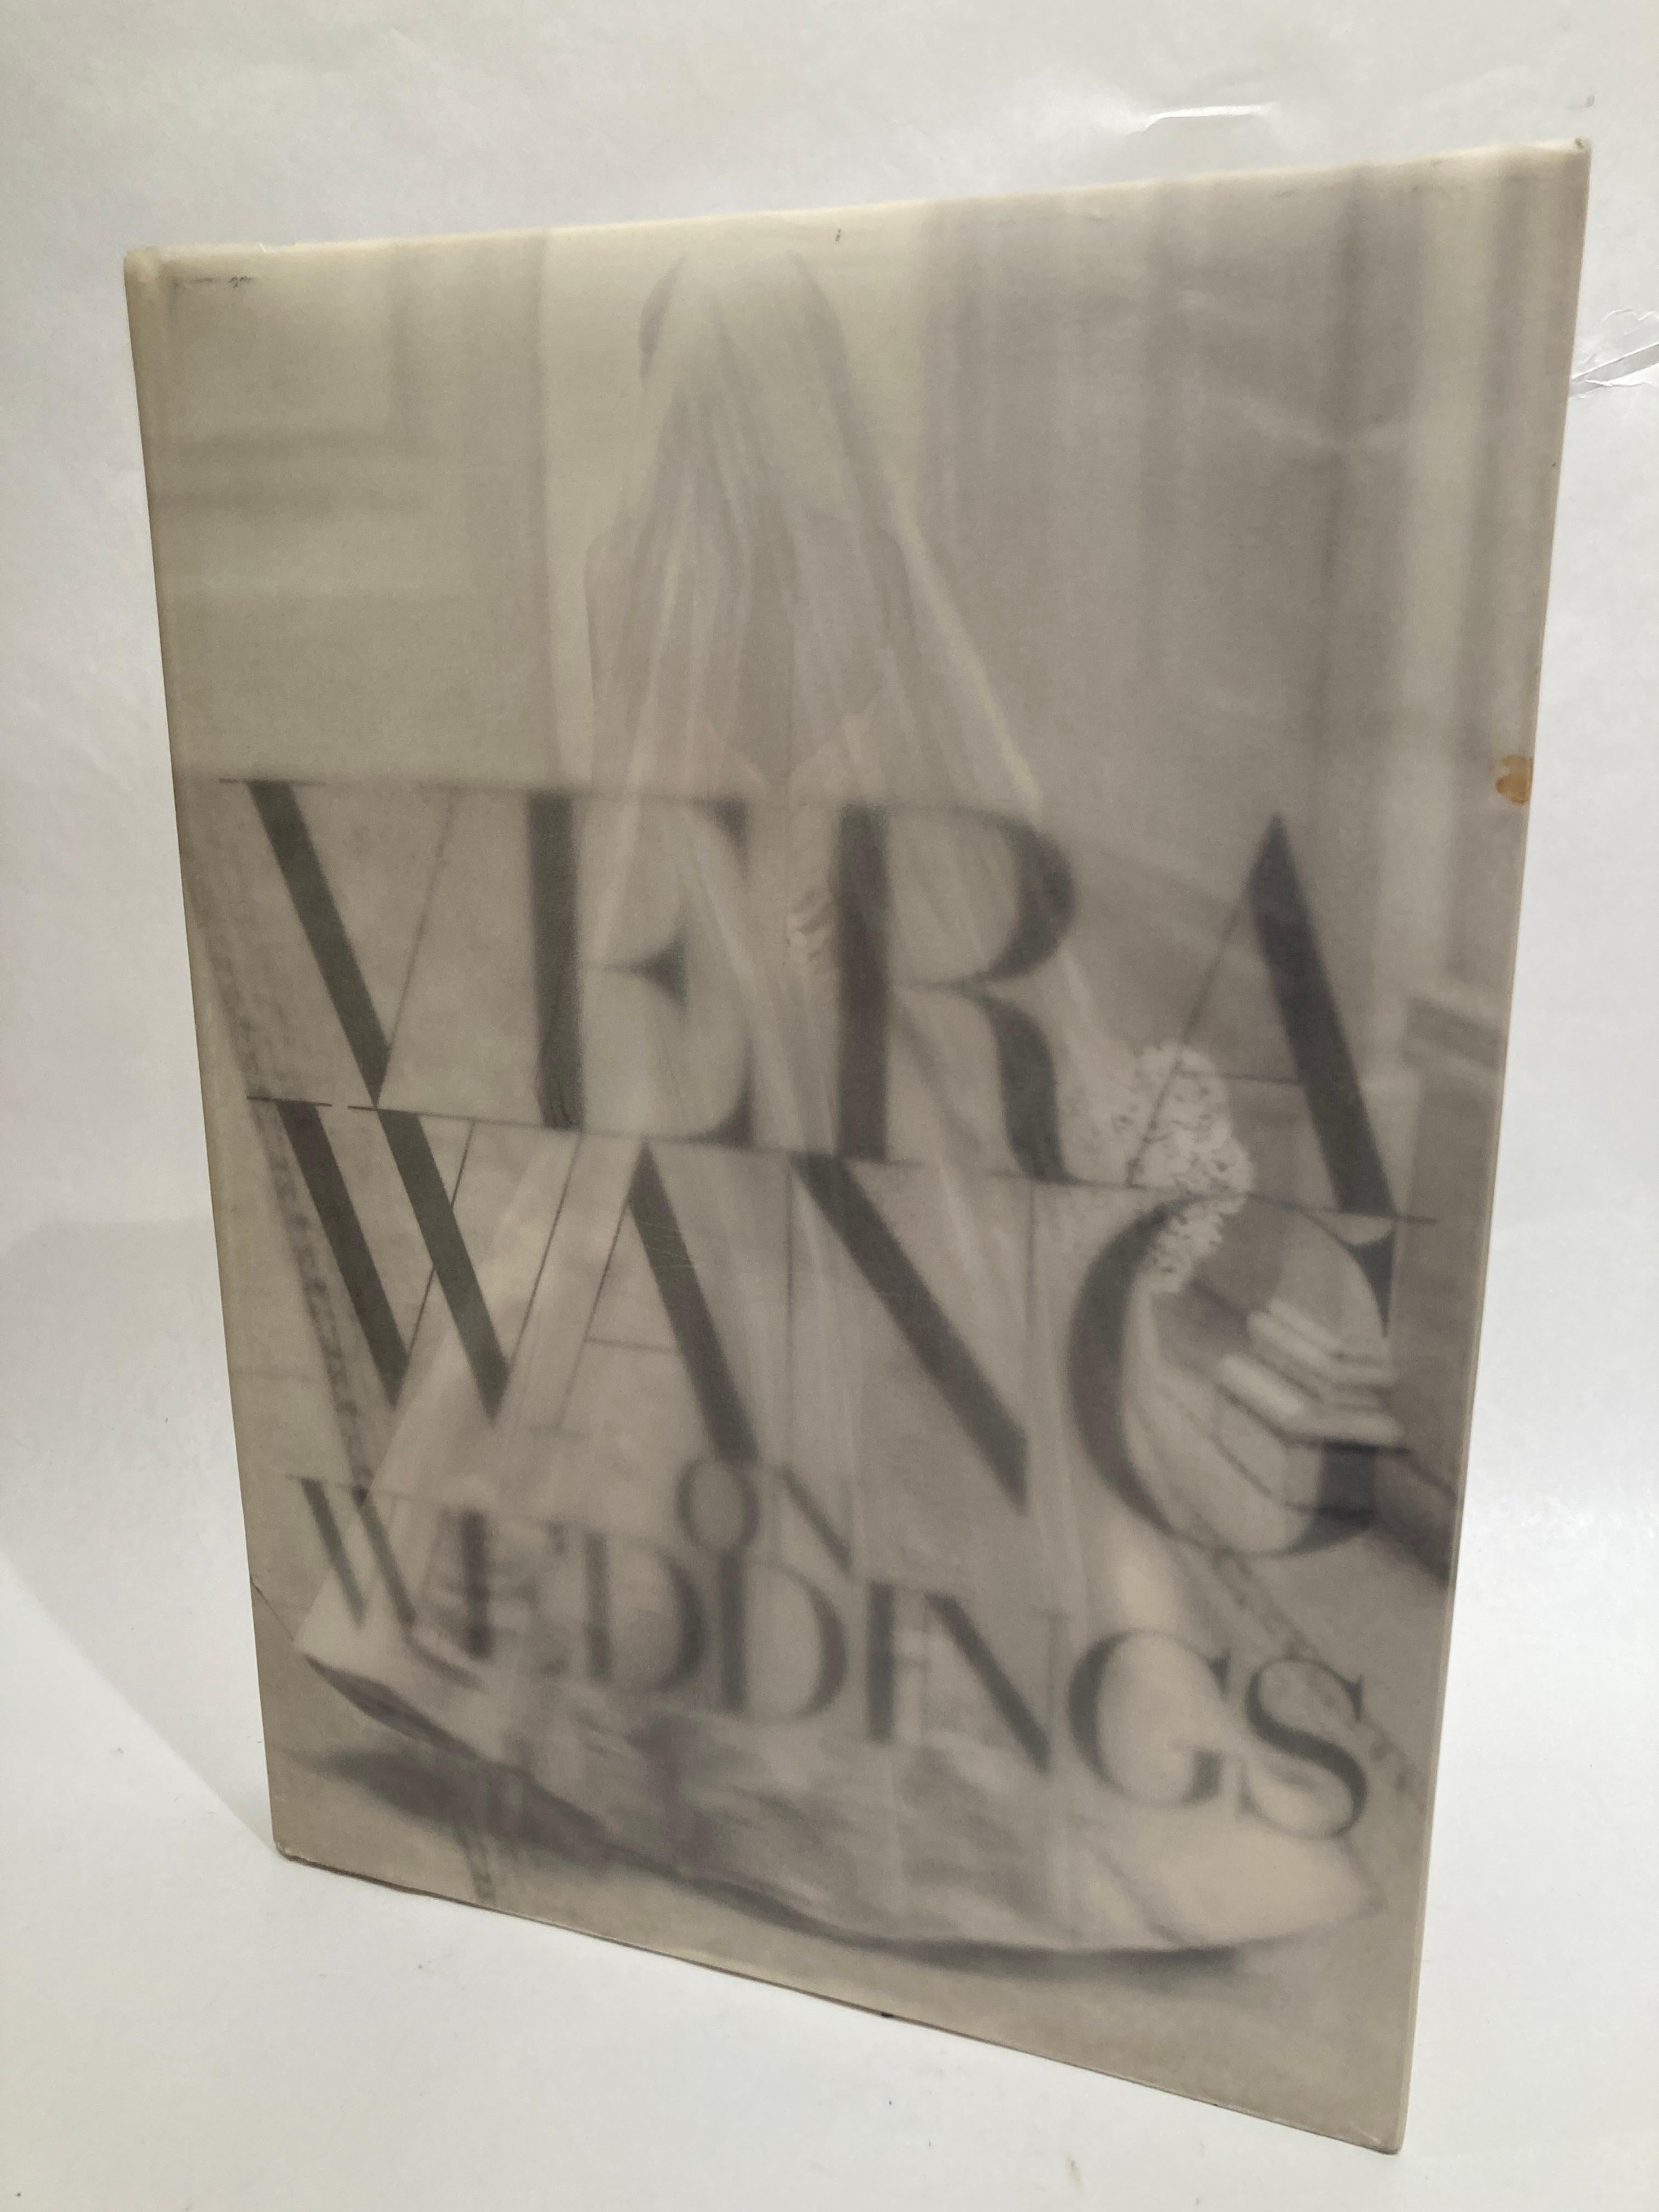 Vera Wang On Weddings by Vera Wang Large Hardcover Book.
In this superbly produced volume by Callaway Editions, Ltd.; the world′s most successful bridal gown designer shares her thoughts and vision on weddings. Culled from years of experience in the